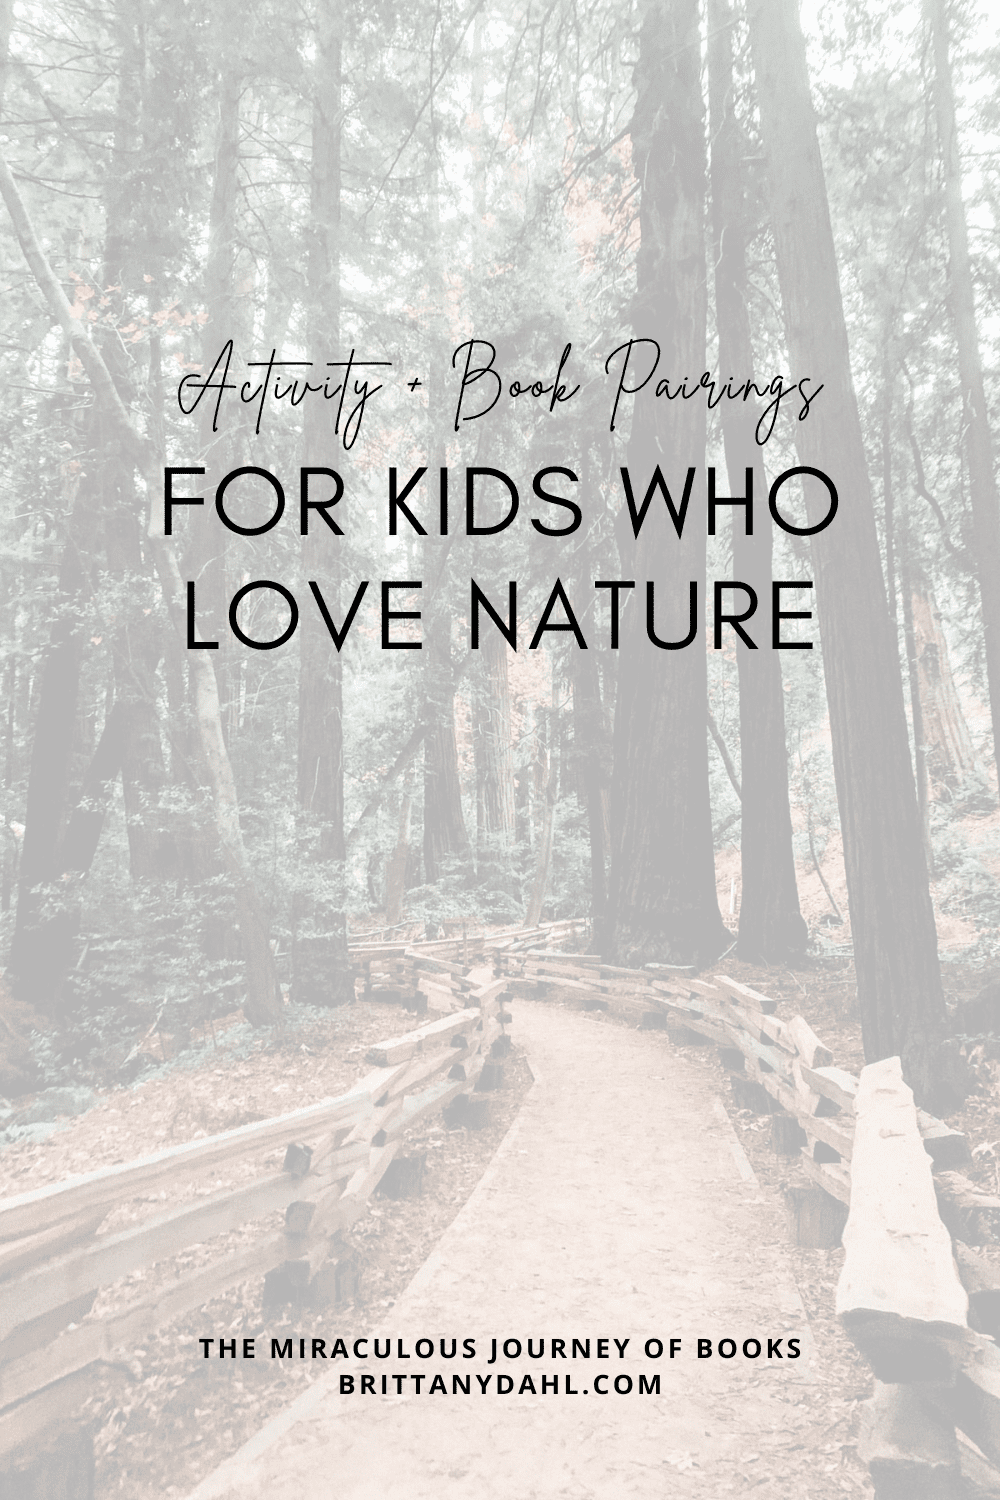 Activity + Book Pairings for Kids Who Love Nature. Image of hiking path through a grove of tall trees.